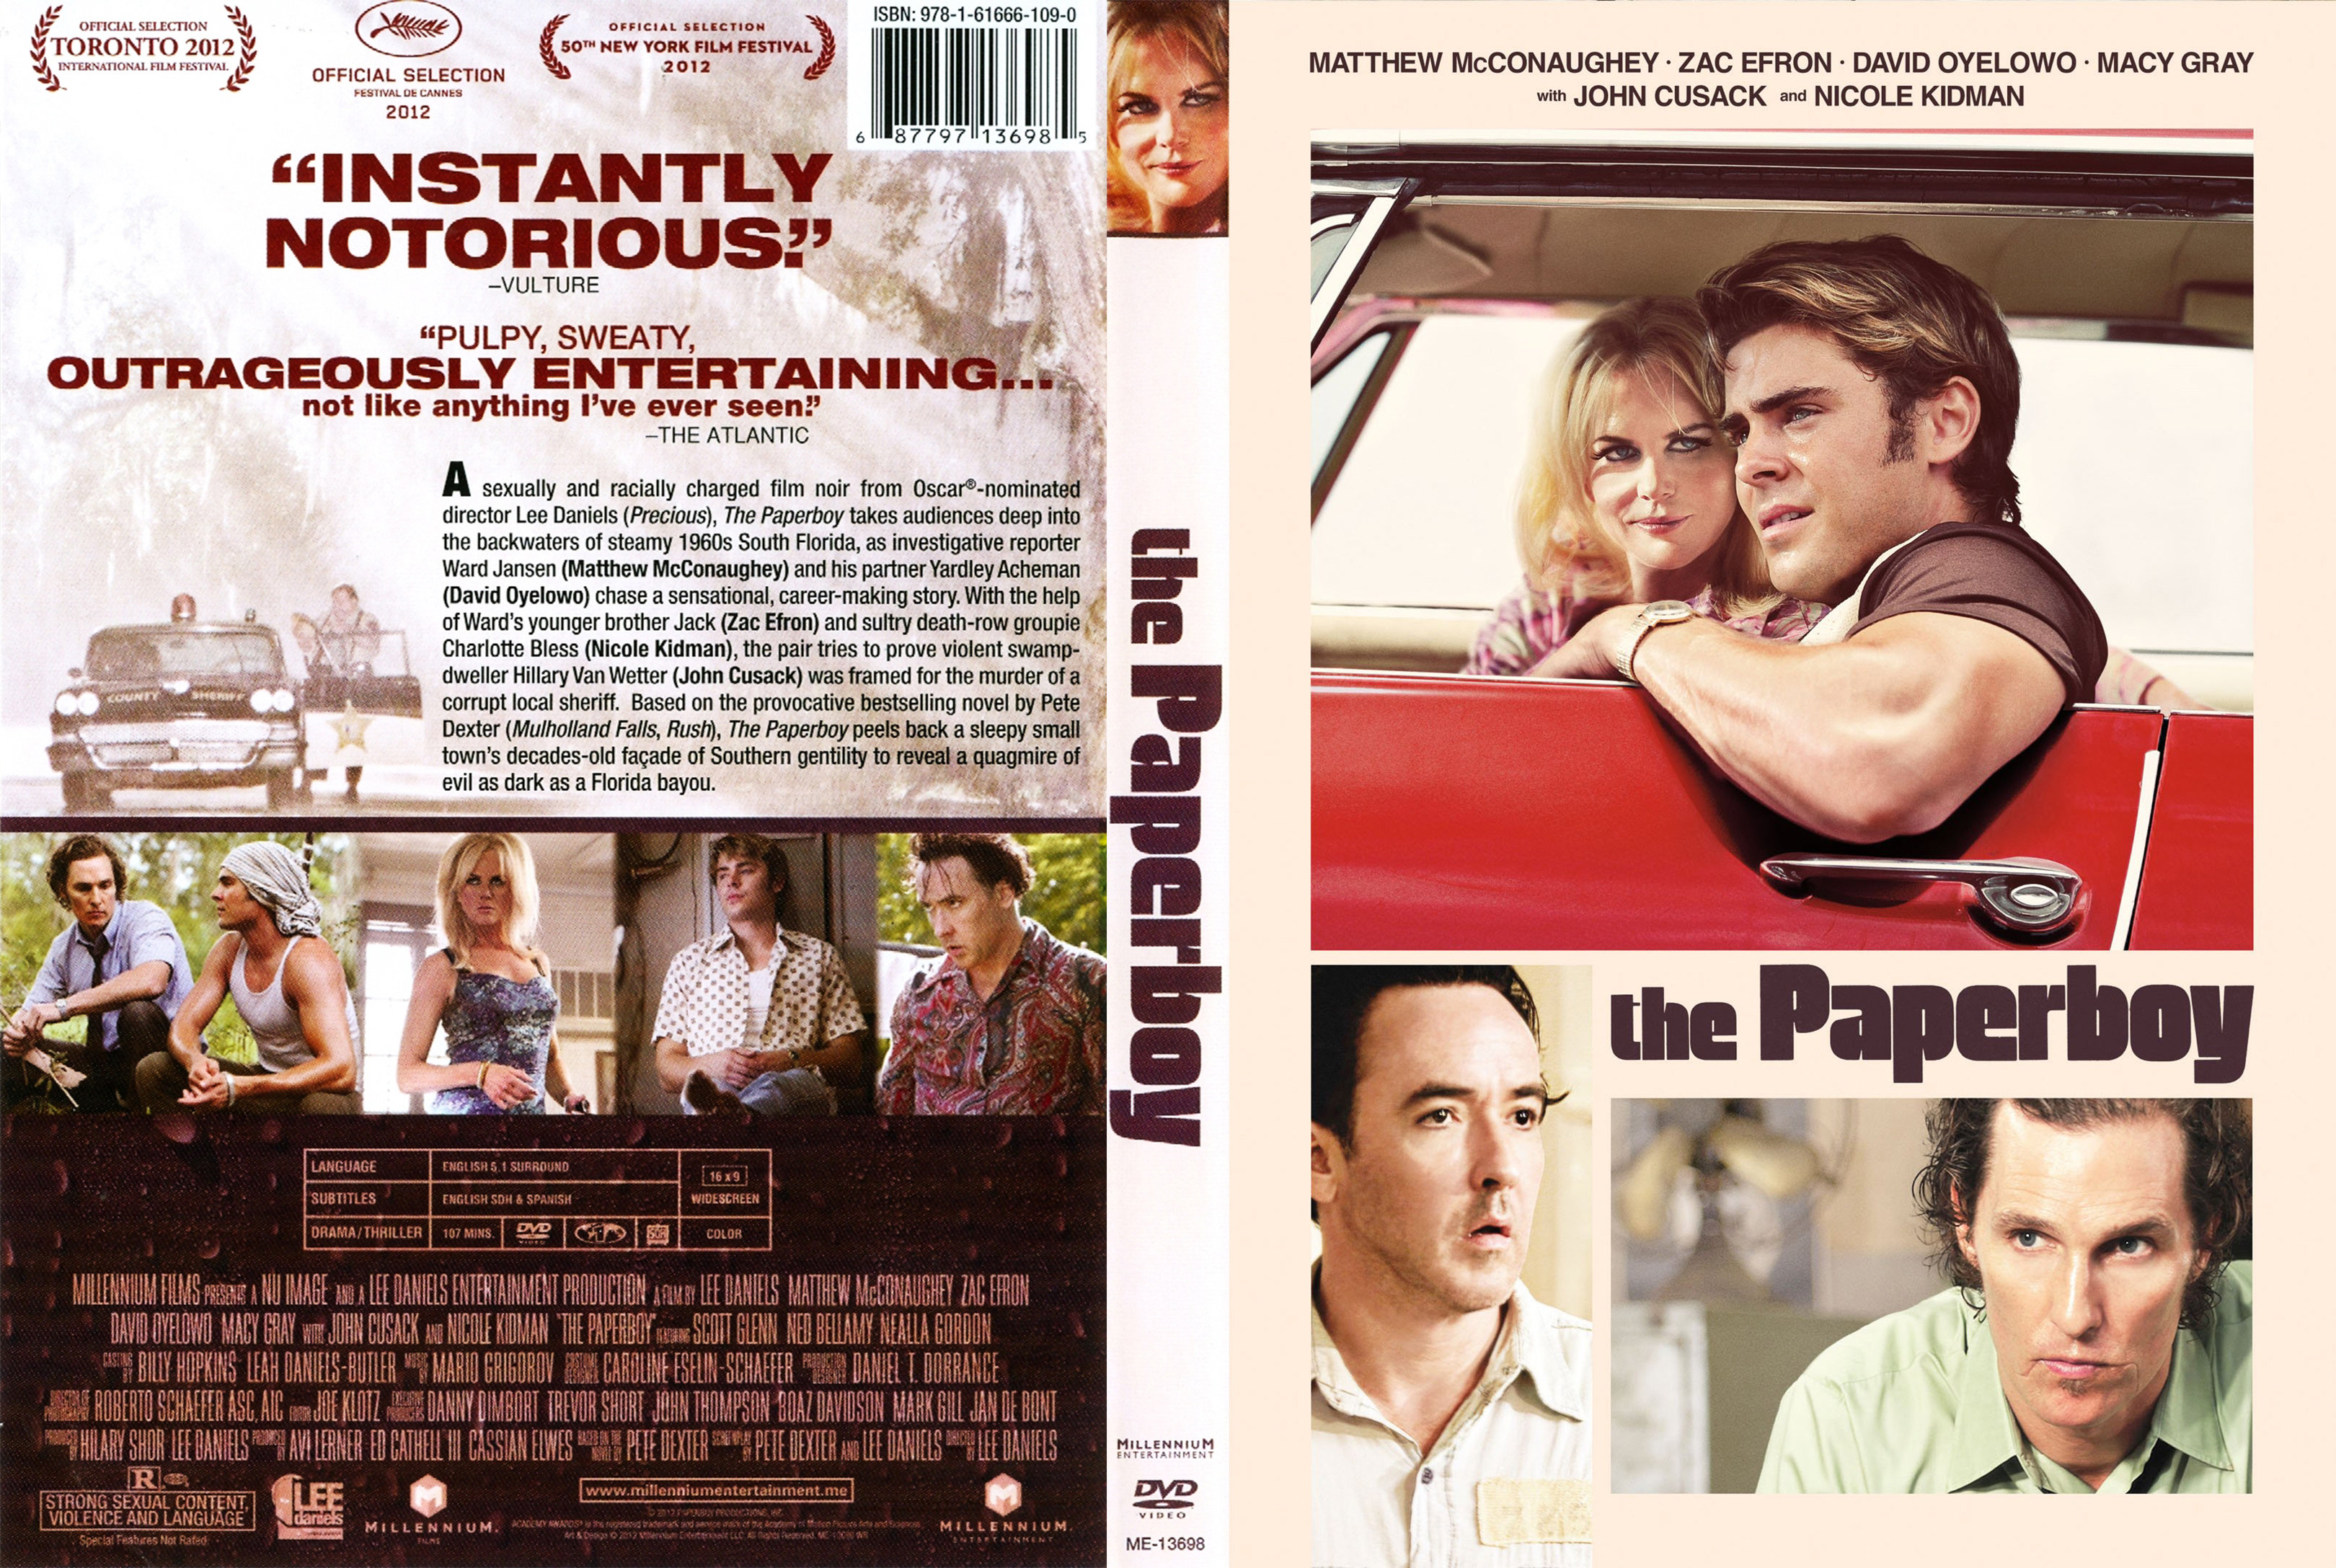 Jaquette DVD The Paperboy Zone 1